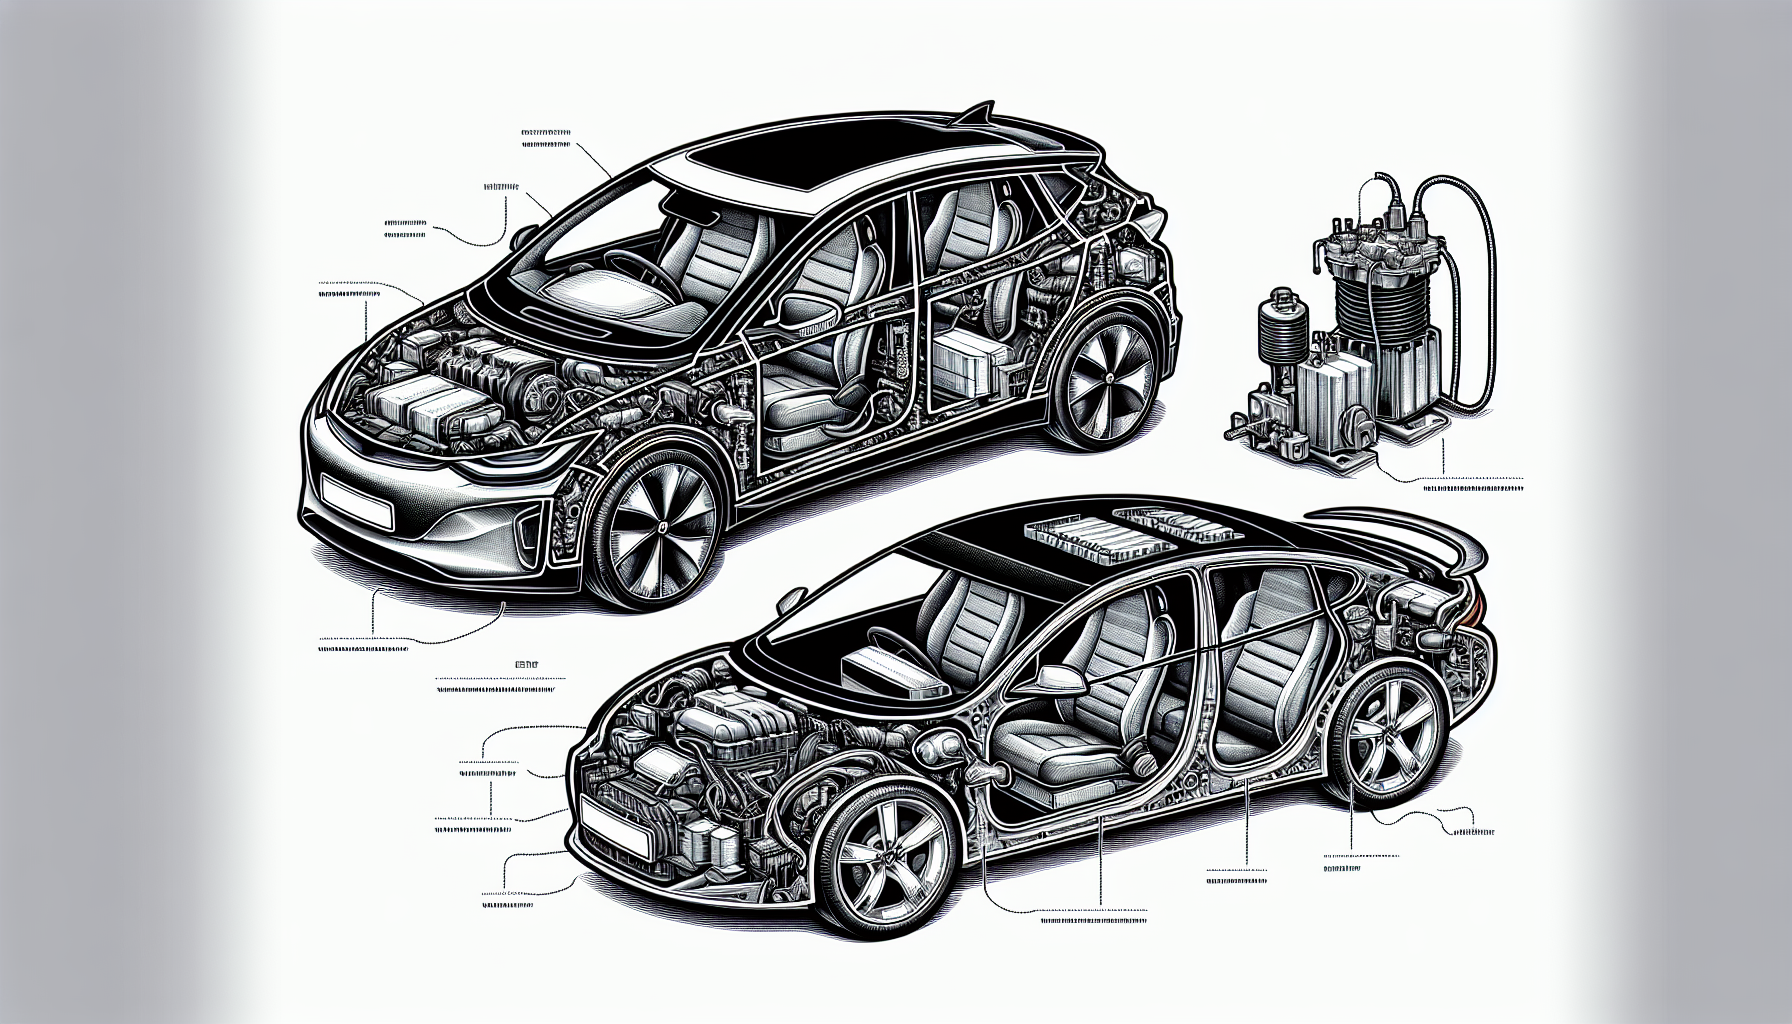 Illustration of different vehicle types - electric, hybrid, and internal combustion engine vehicles